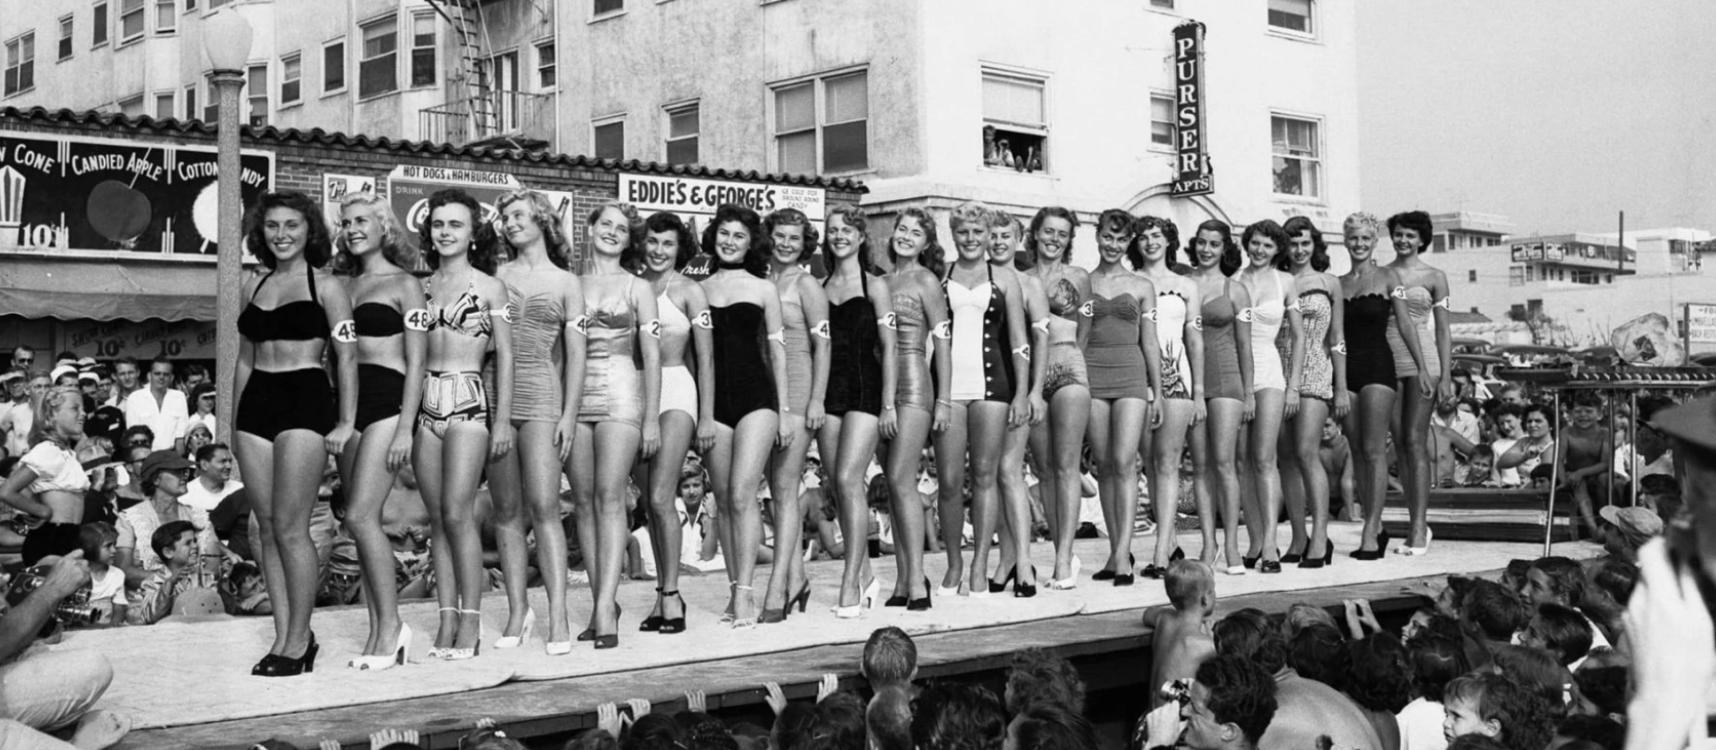 "Miss Muscle Beach" contest, 1951.